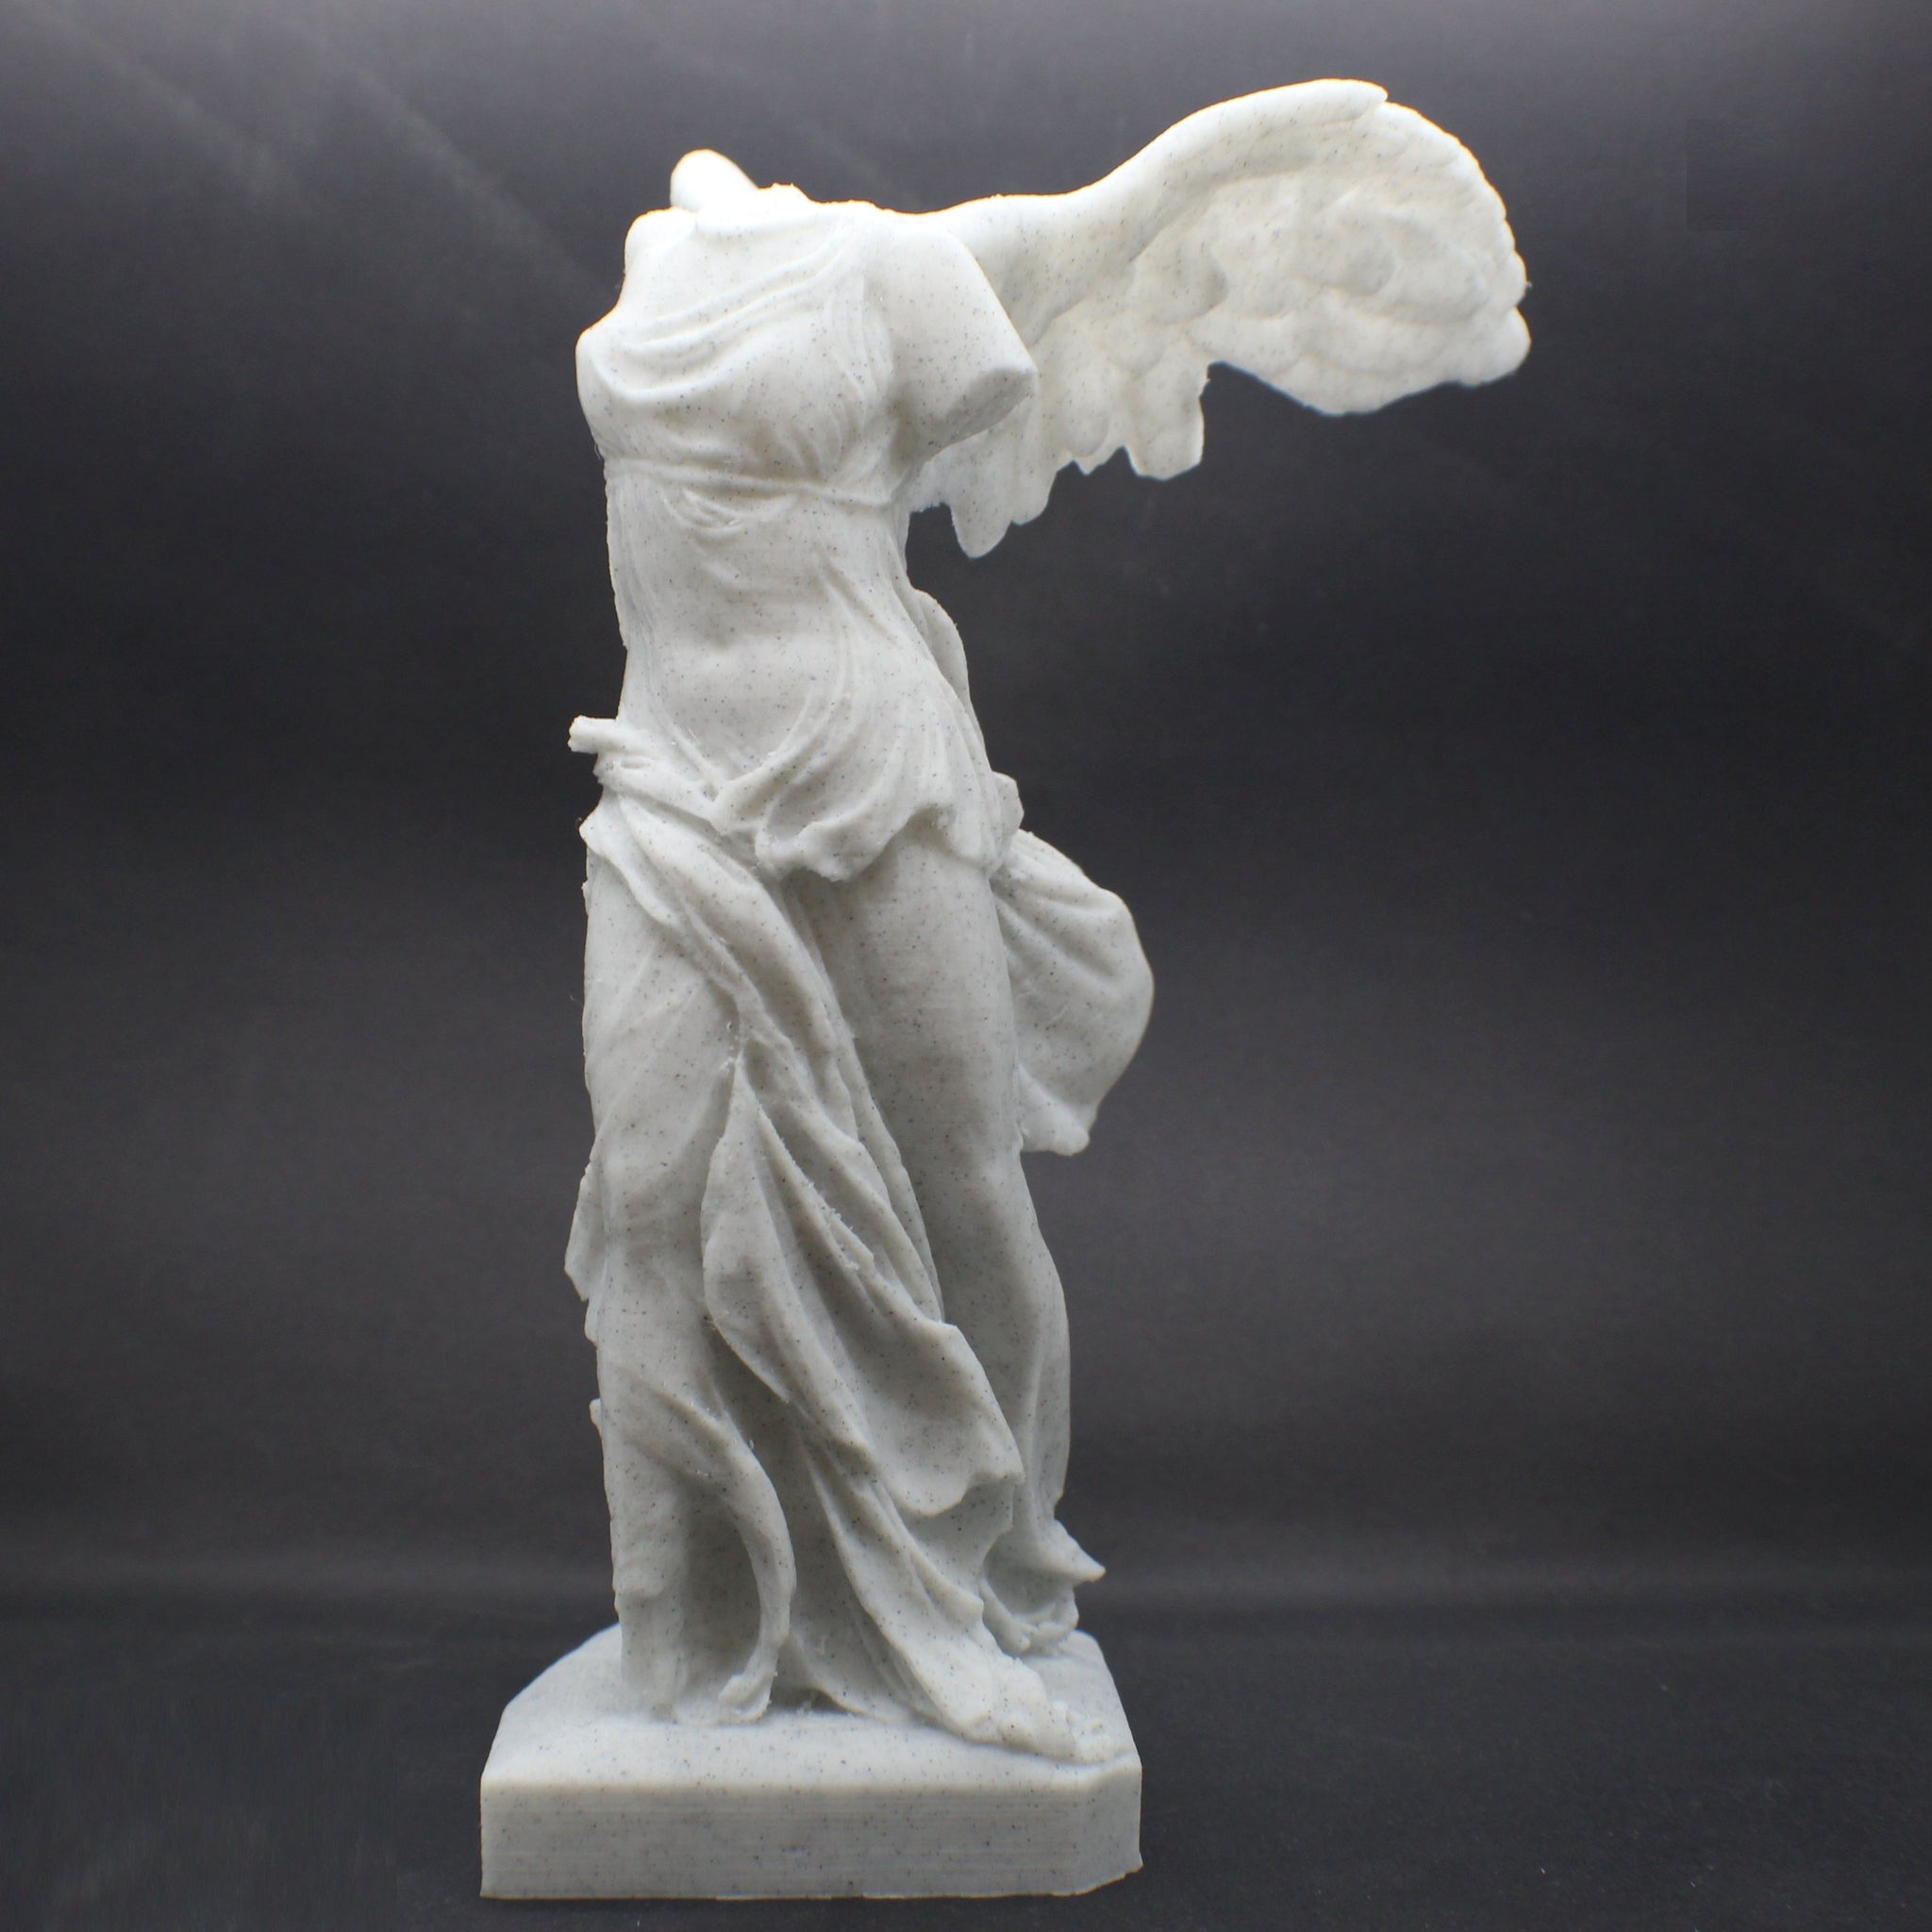 Winged of (Nike of Samothrace) 8" Statue in PLA – Of History